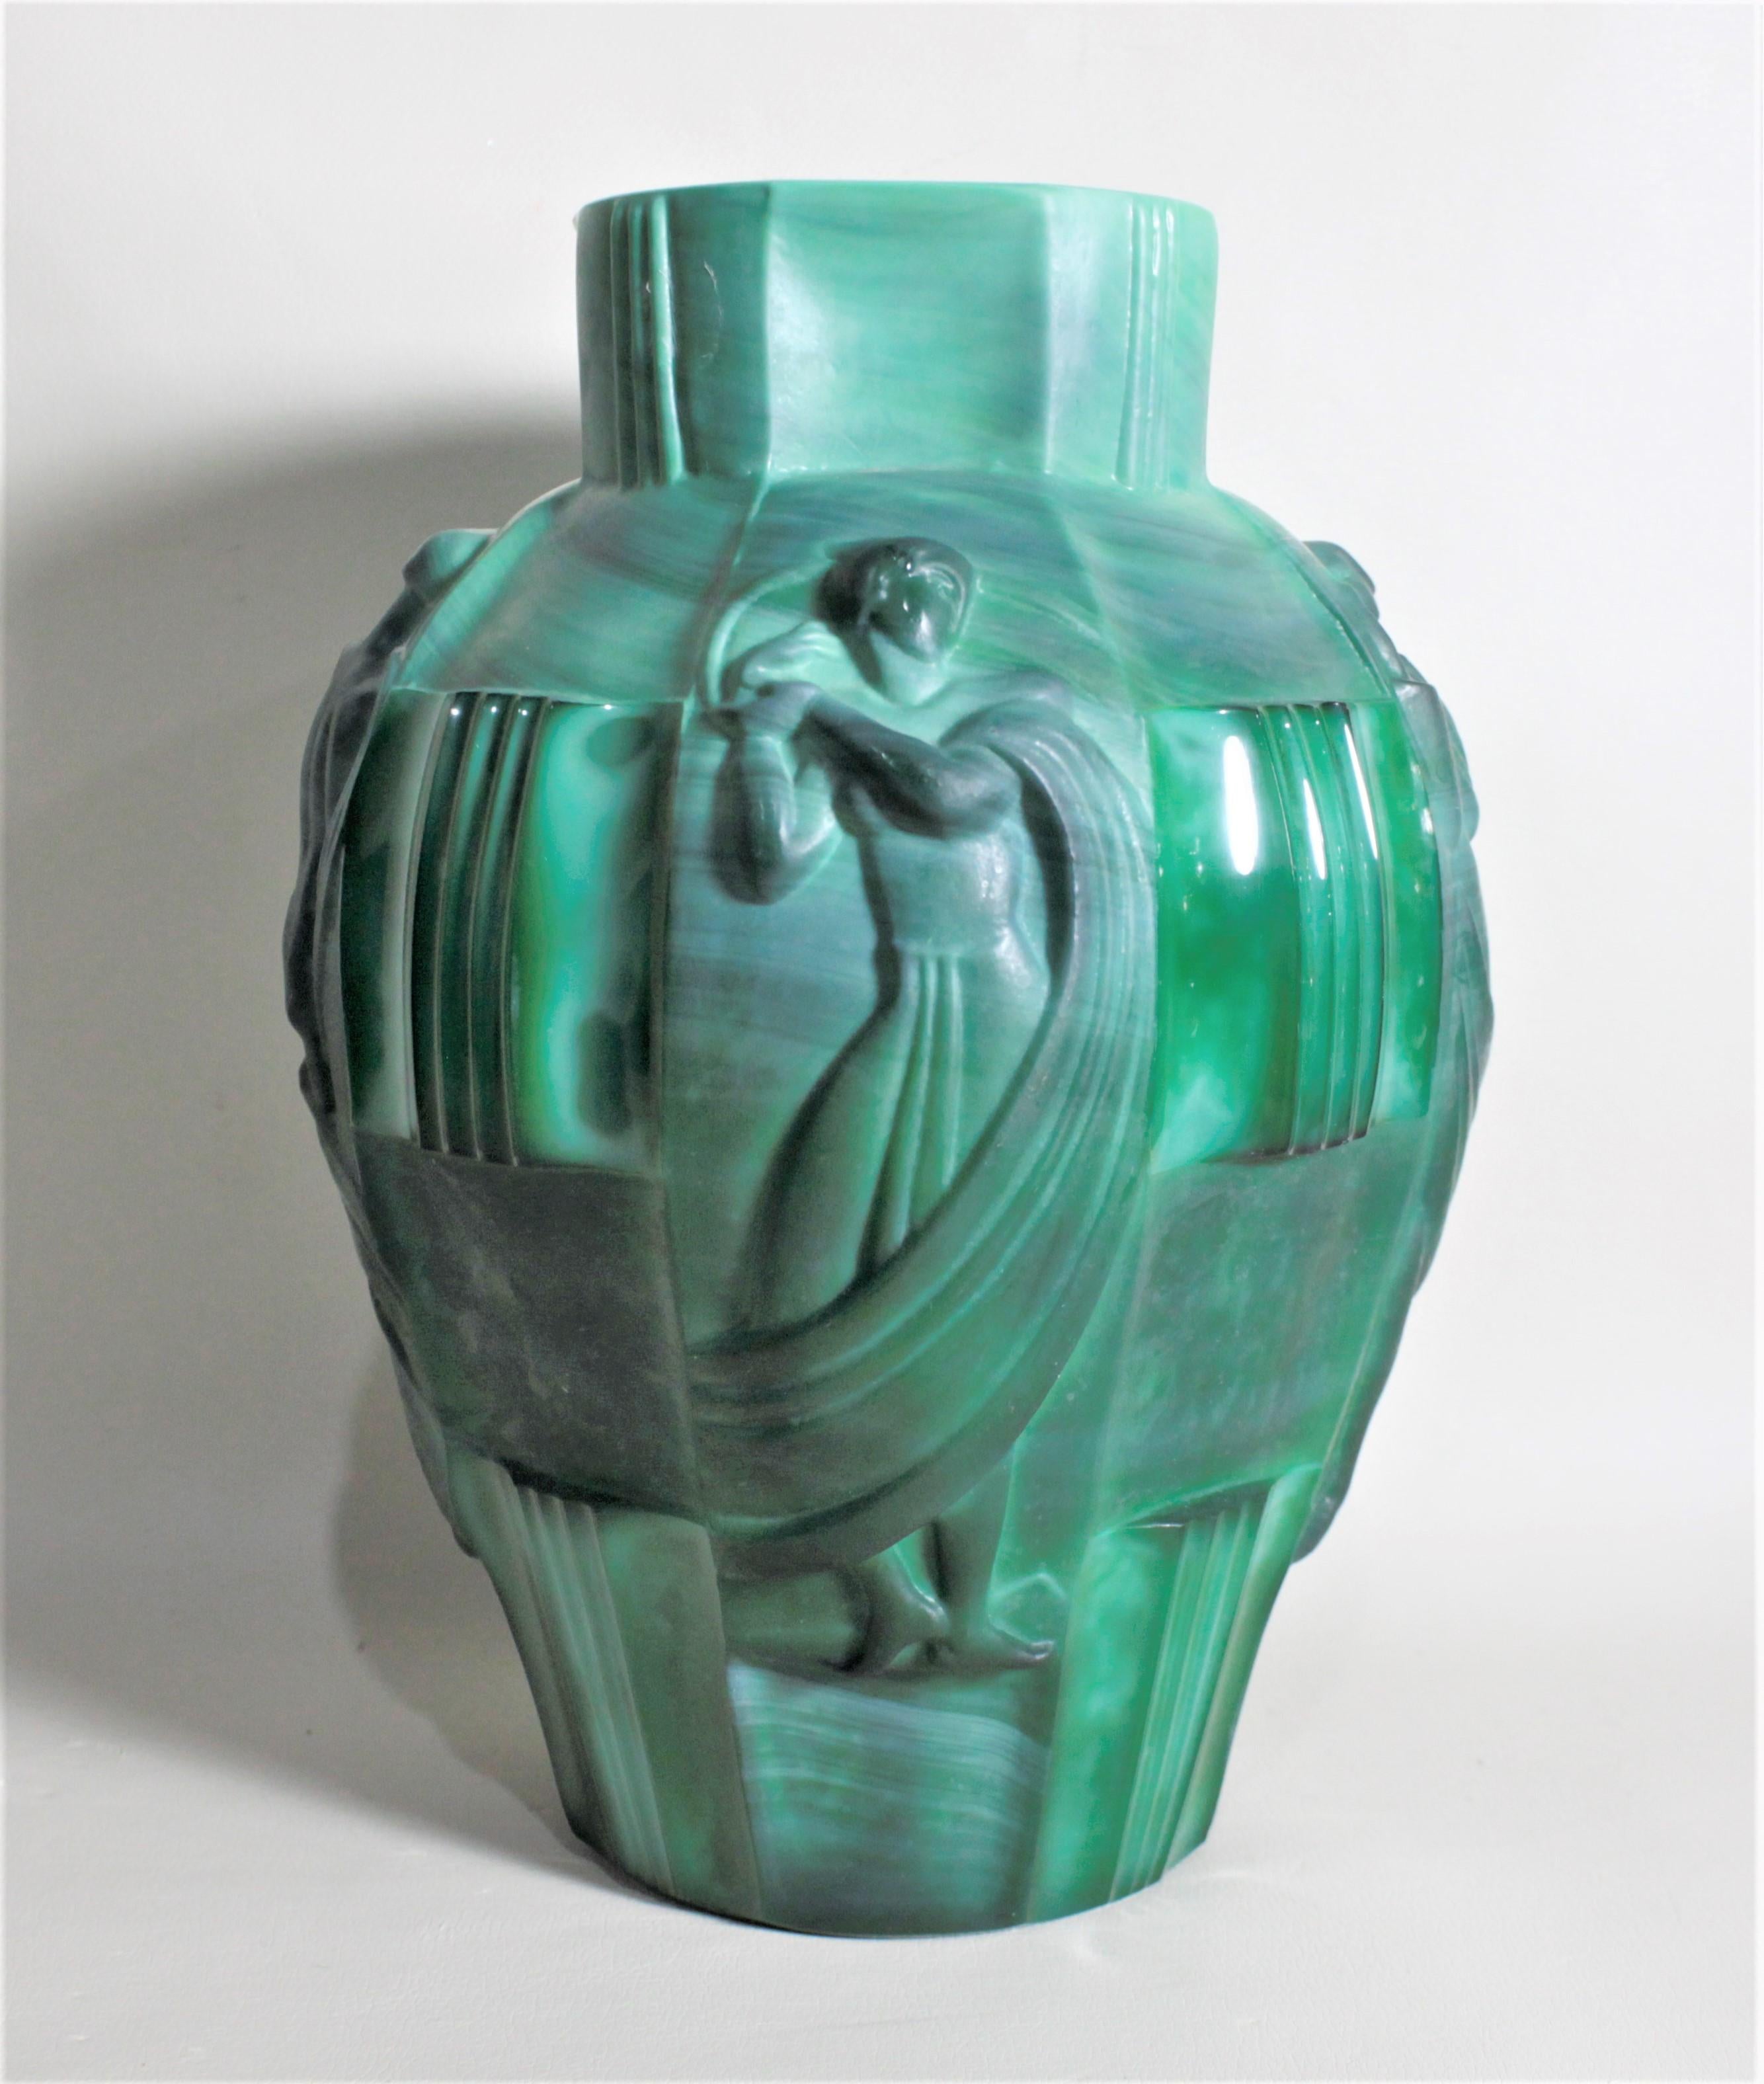 Molded Large Art Deco Malachite Vase with Neoclassical Figures